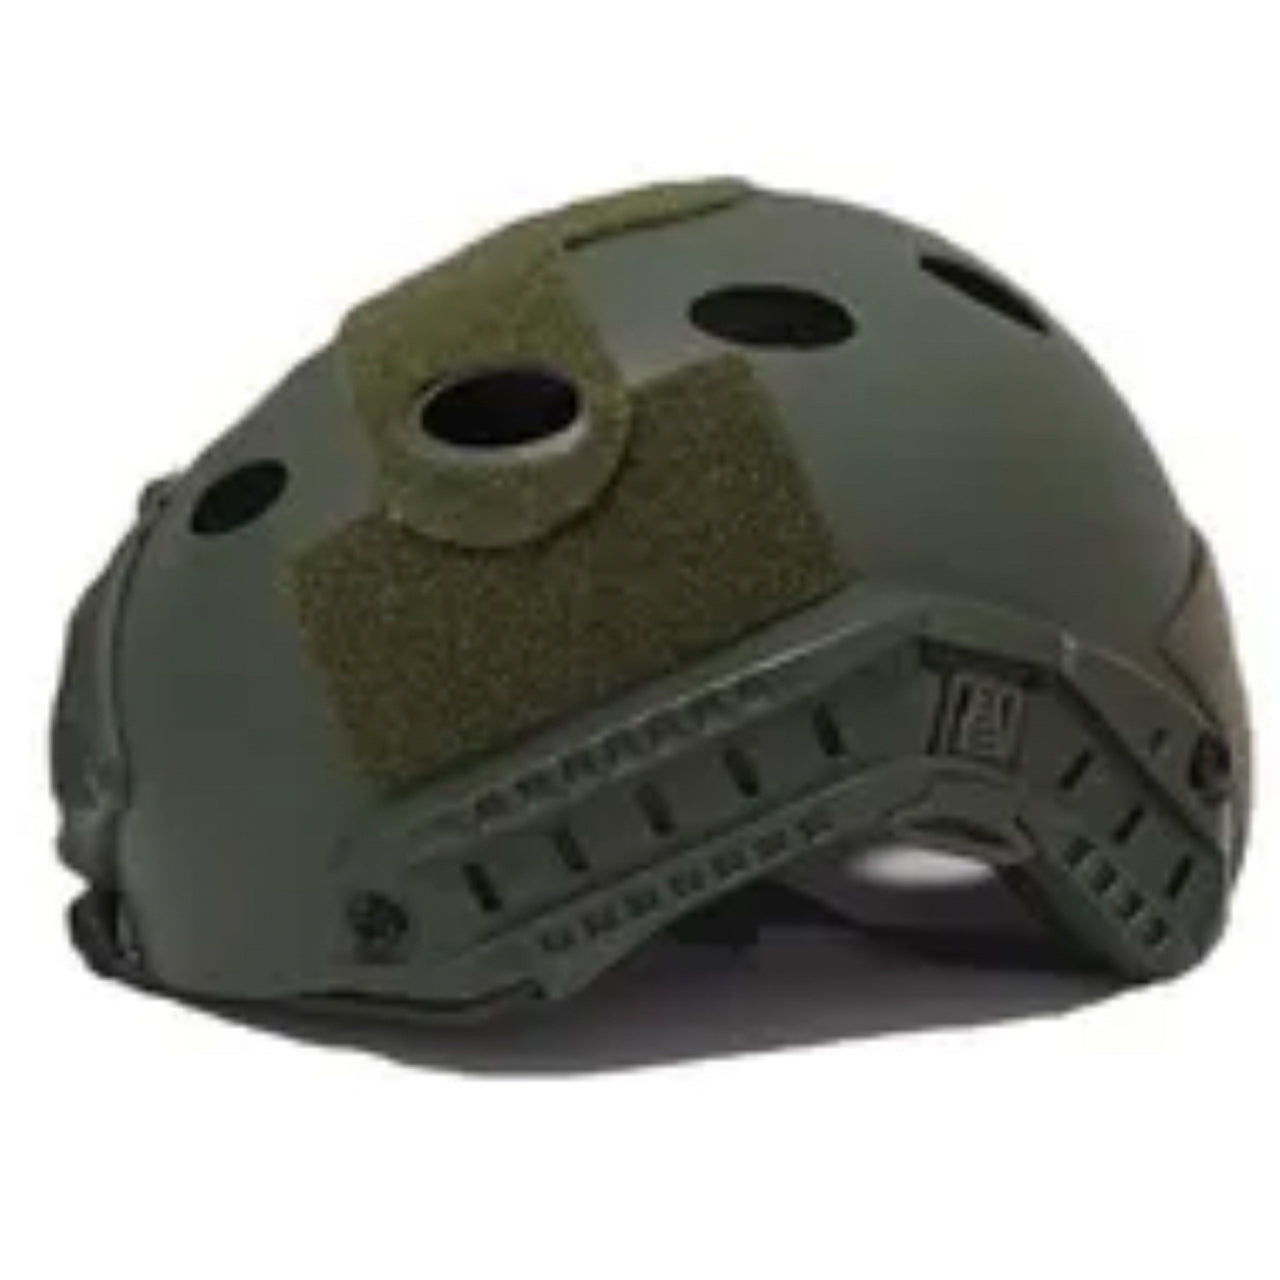 Crafted with durable plastic and foam padding, this injection-molded Fast Helmet is ready for any mission! Attach signs and lights easily with its Velcro fasteners, and the NVG equipment compatible design is ready for any environment. www.defenceqstore.com.au